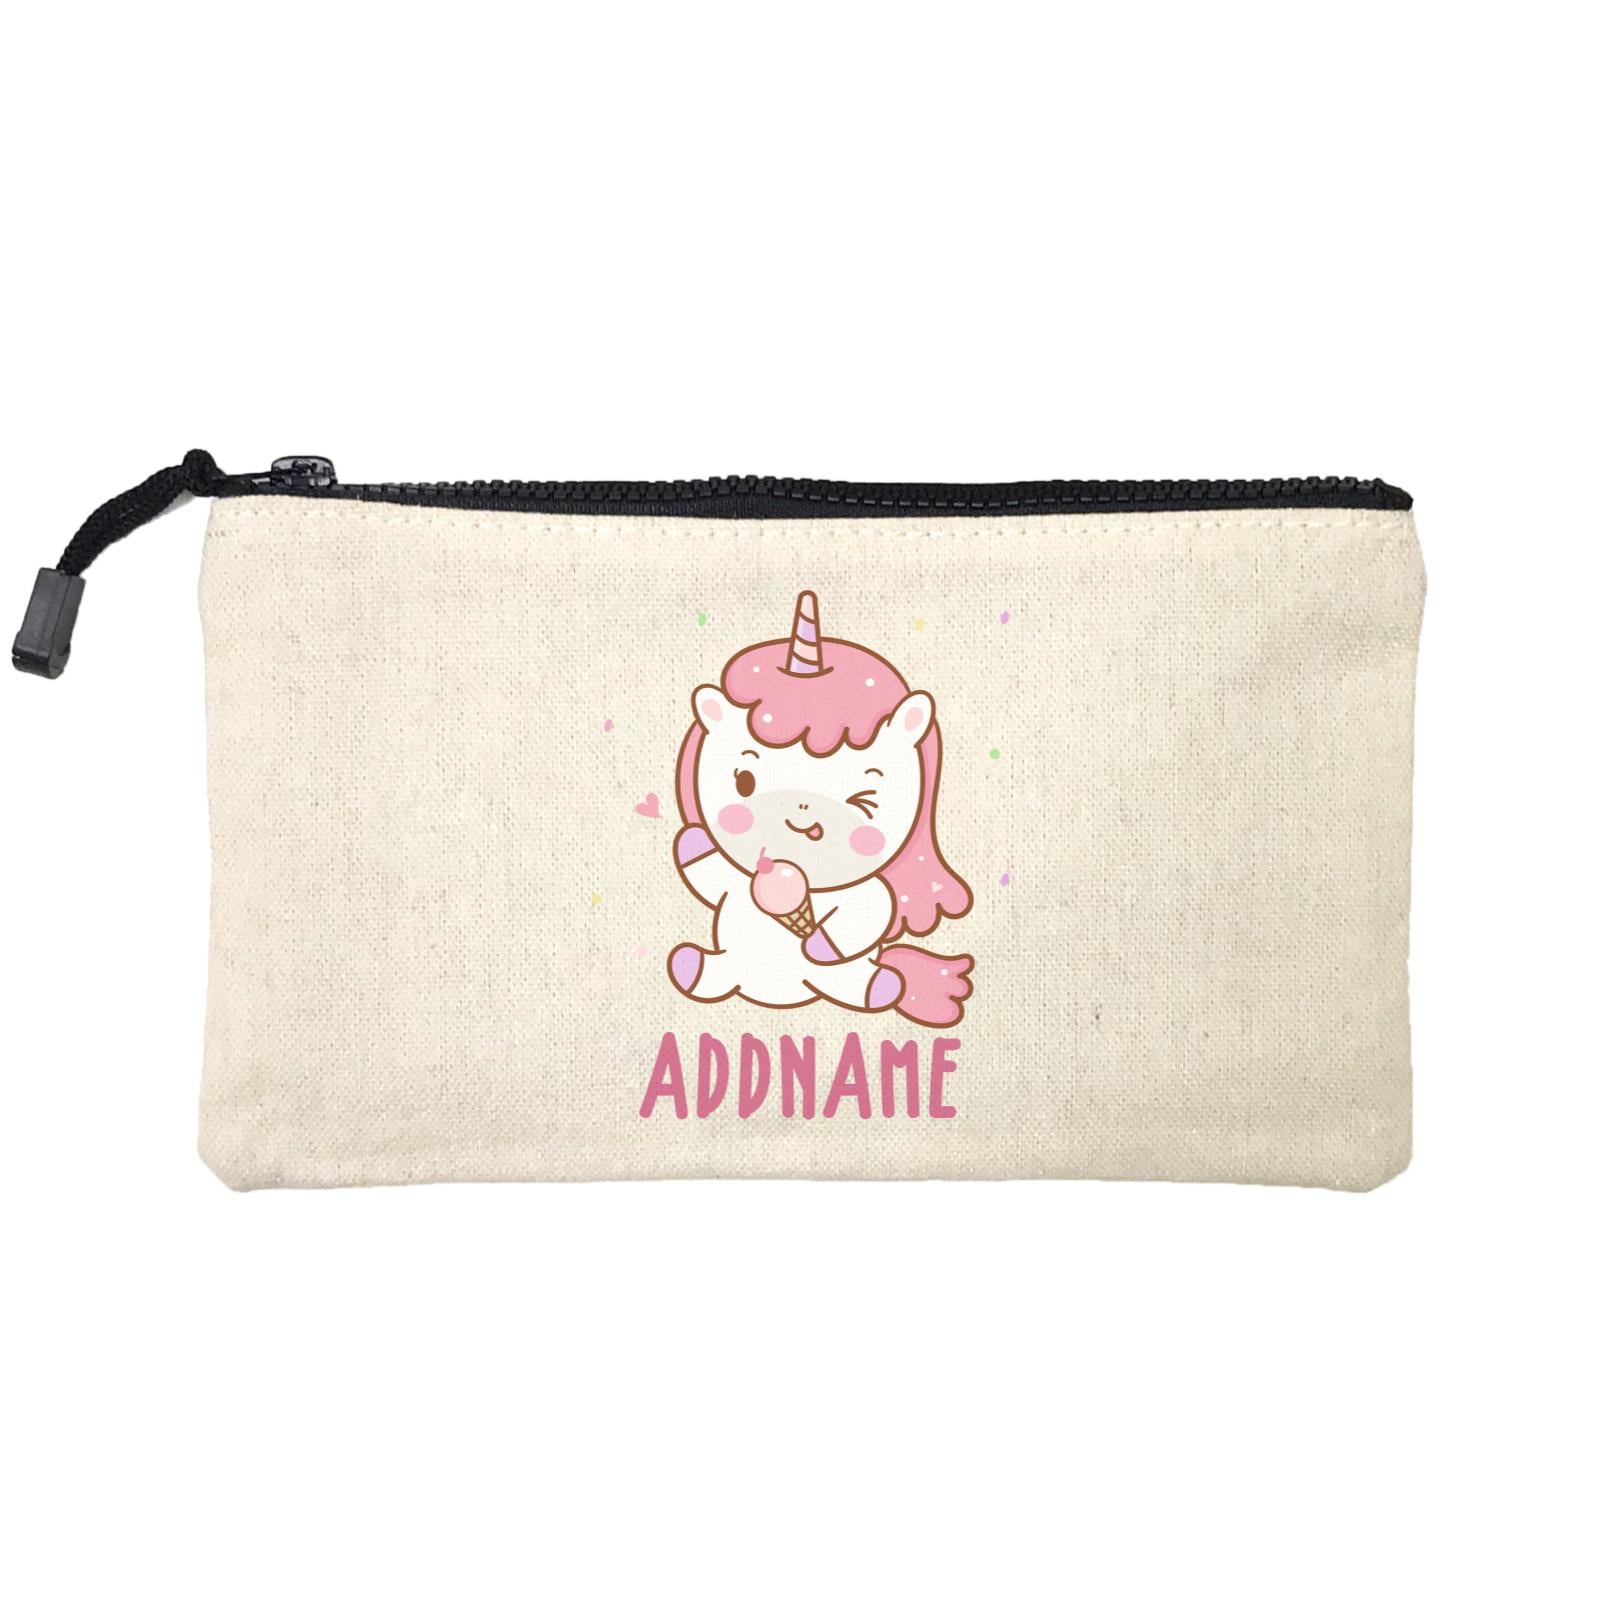 Unicorn And Princess Series Unicorn Happy Eating Ice Cream Addname Mini Accessories Stationery Pouch